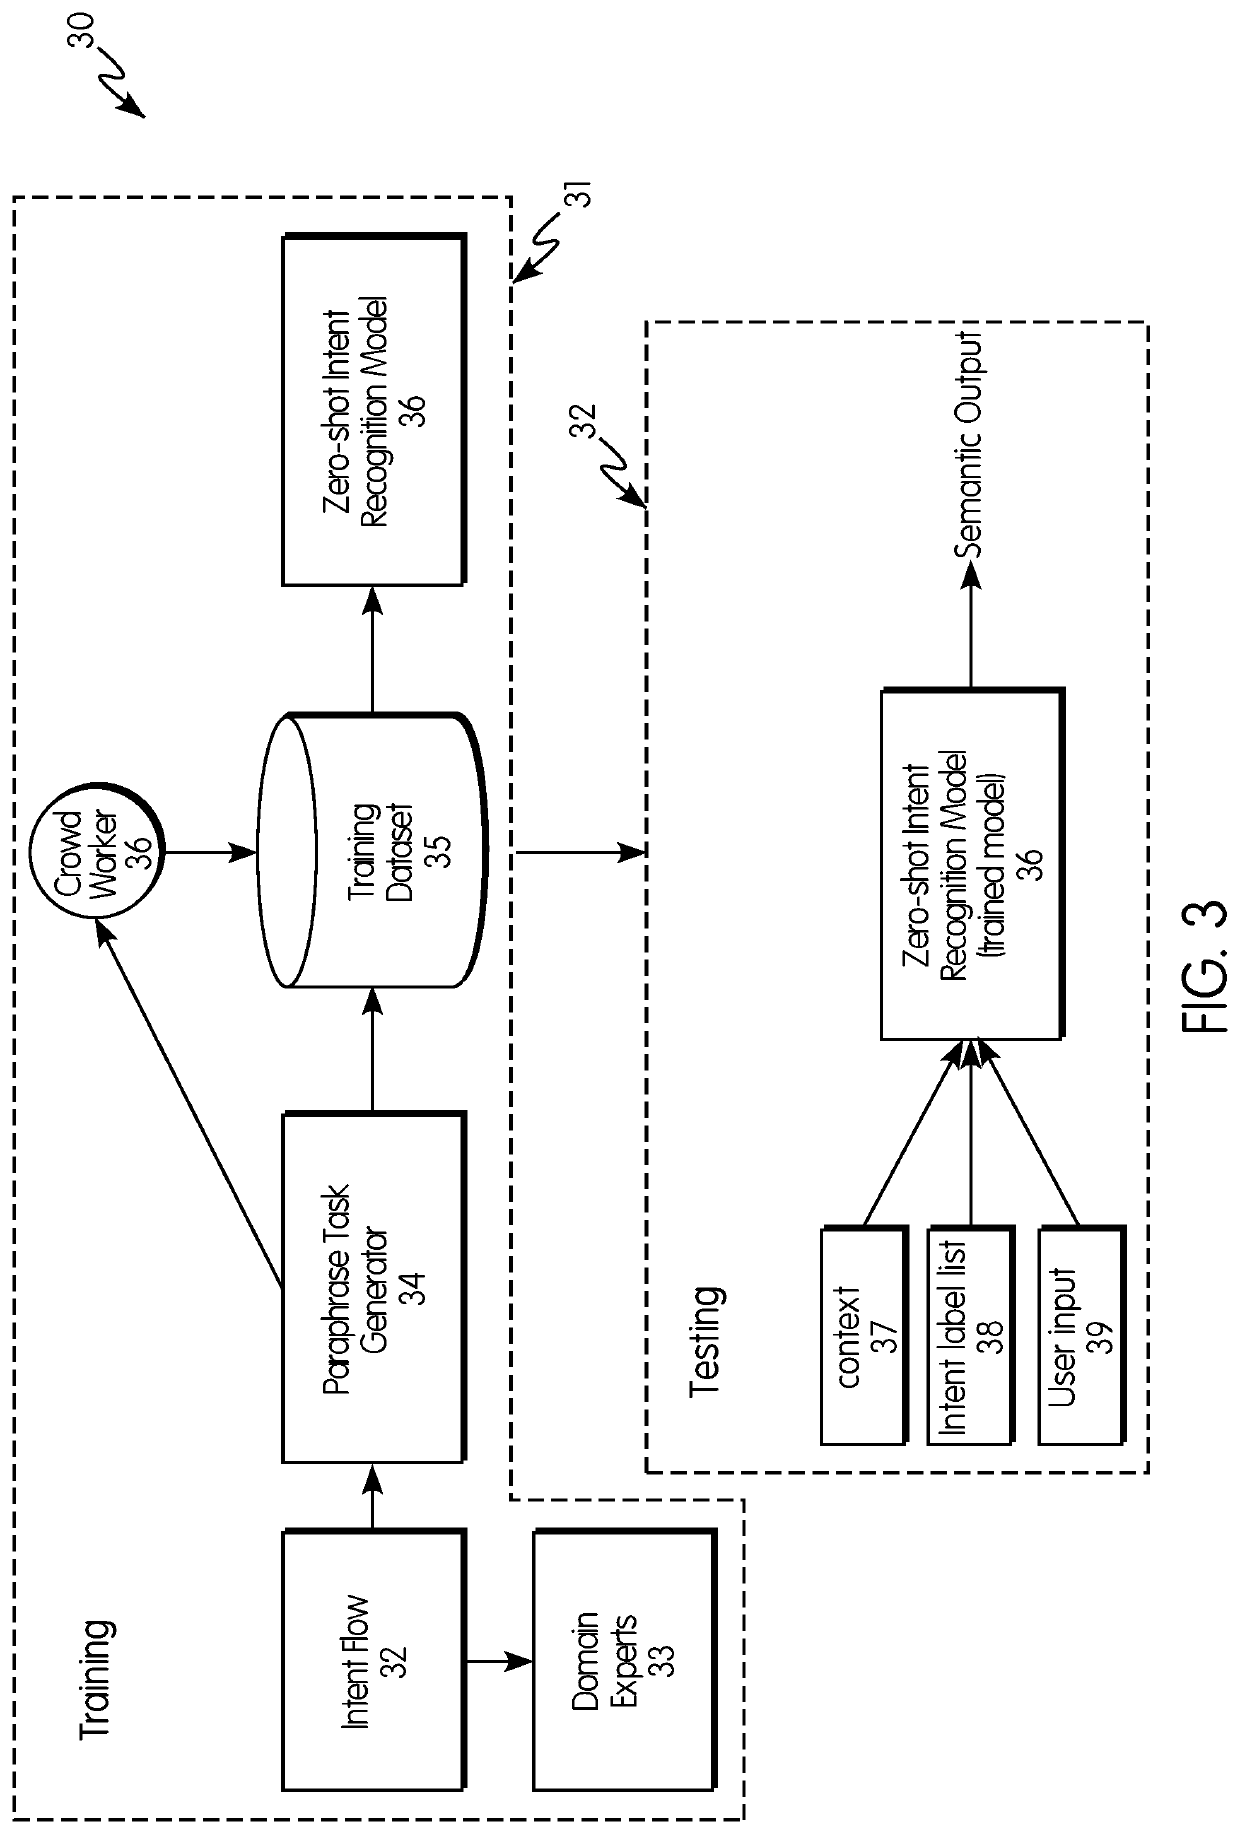 System and method for defining dialog intents and building zero-shot intent recognition models